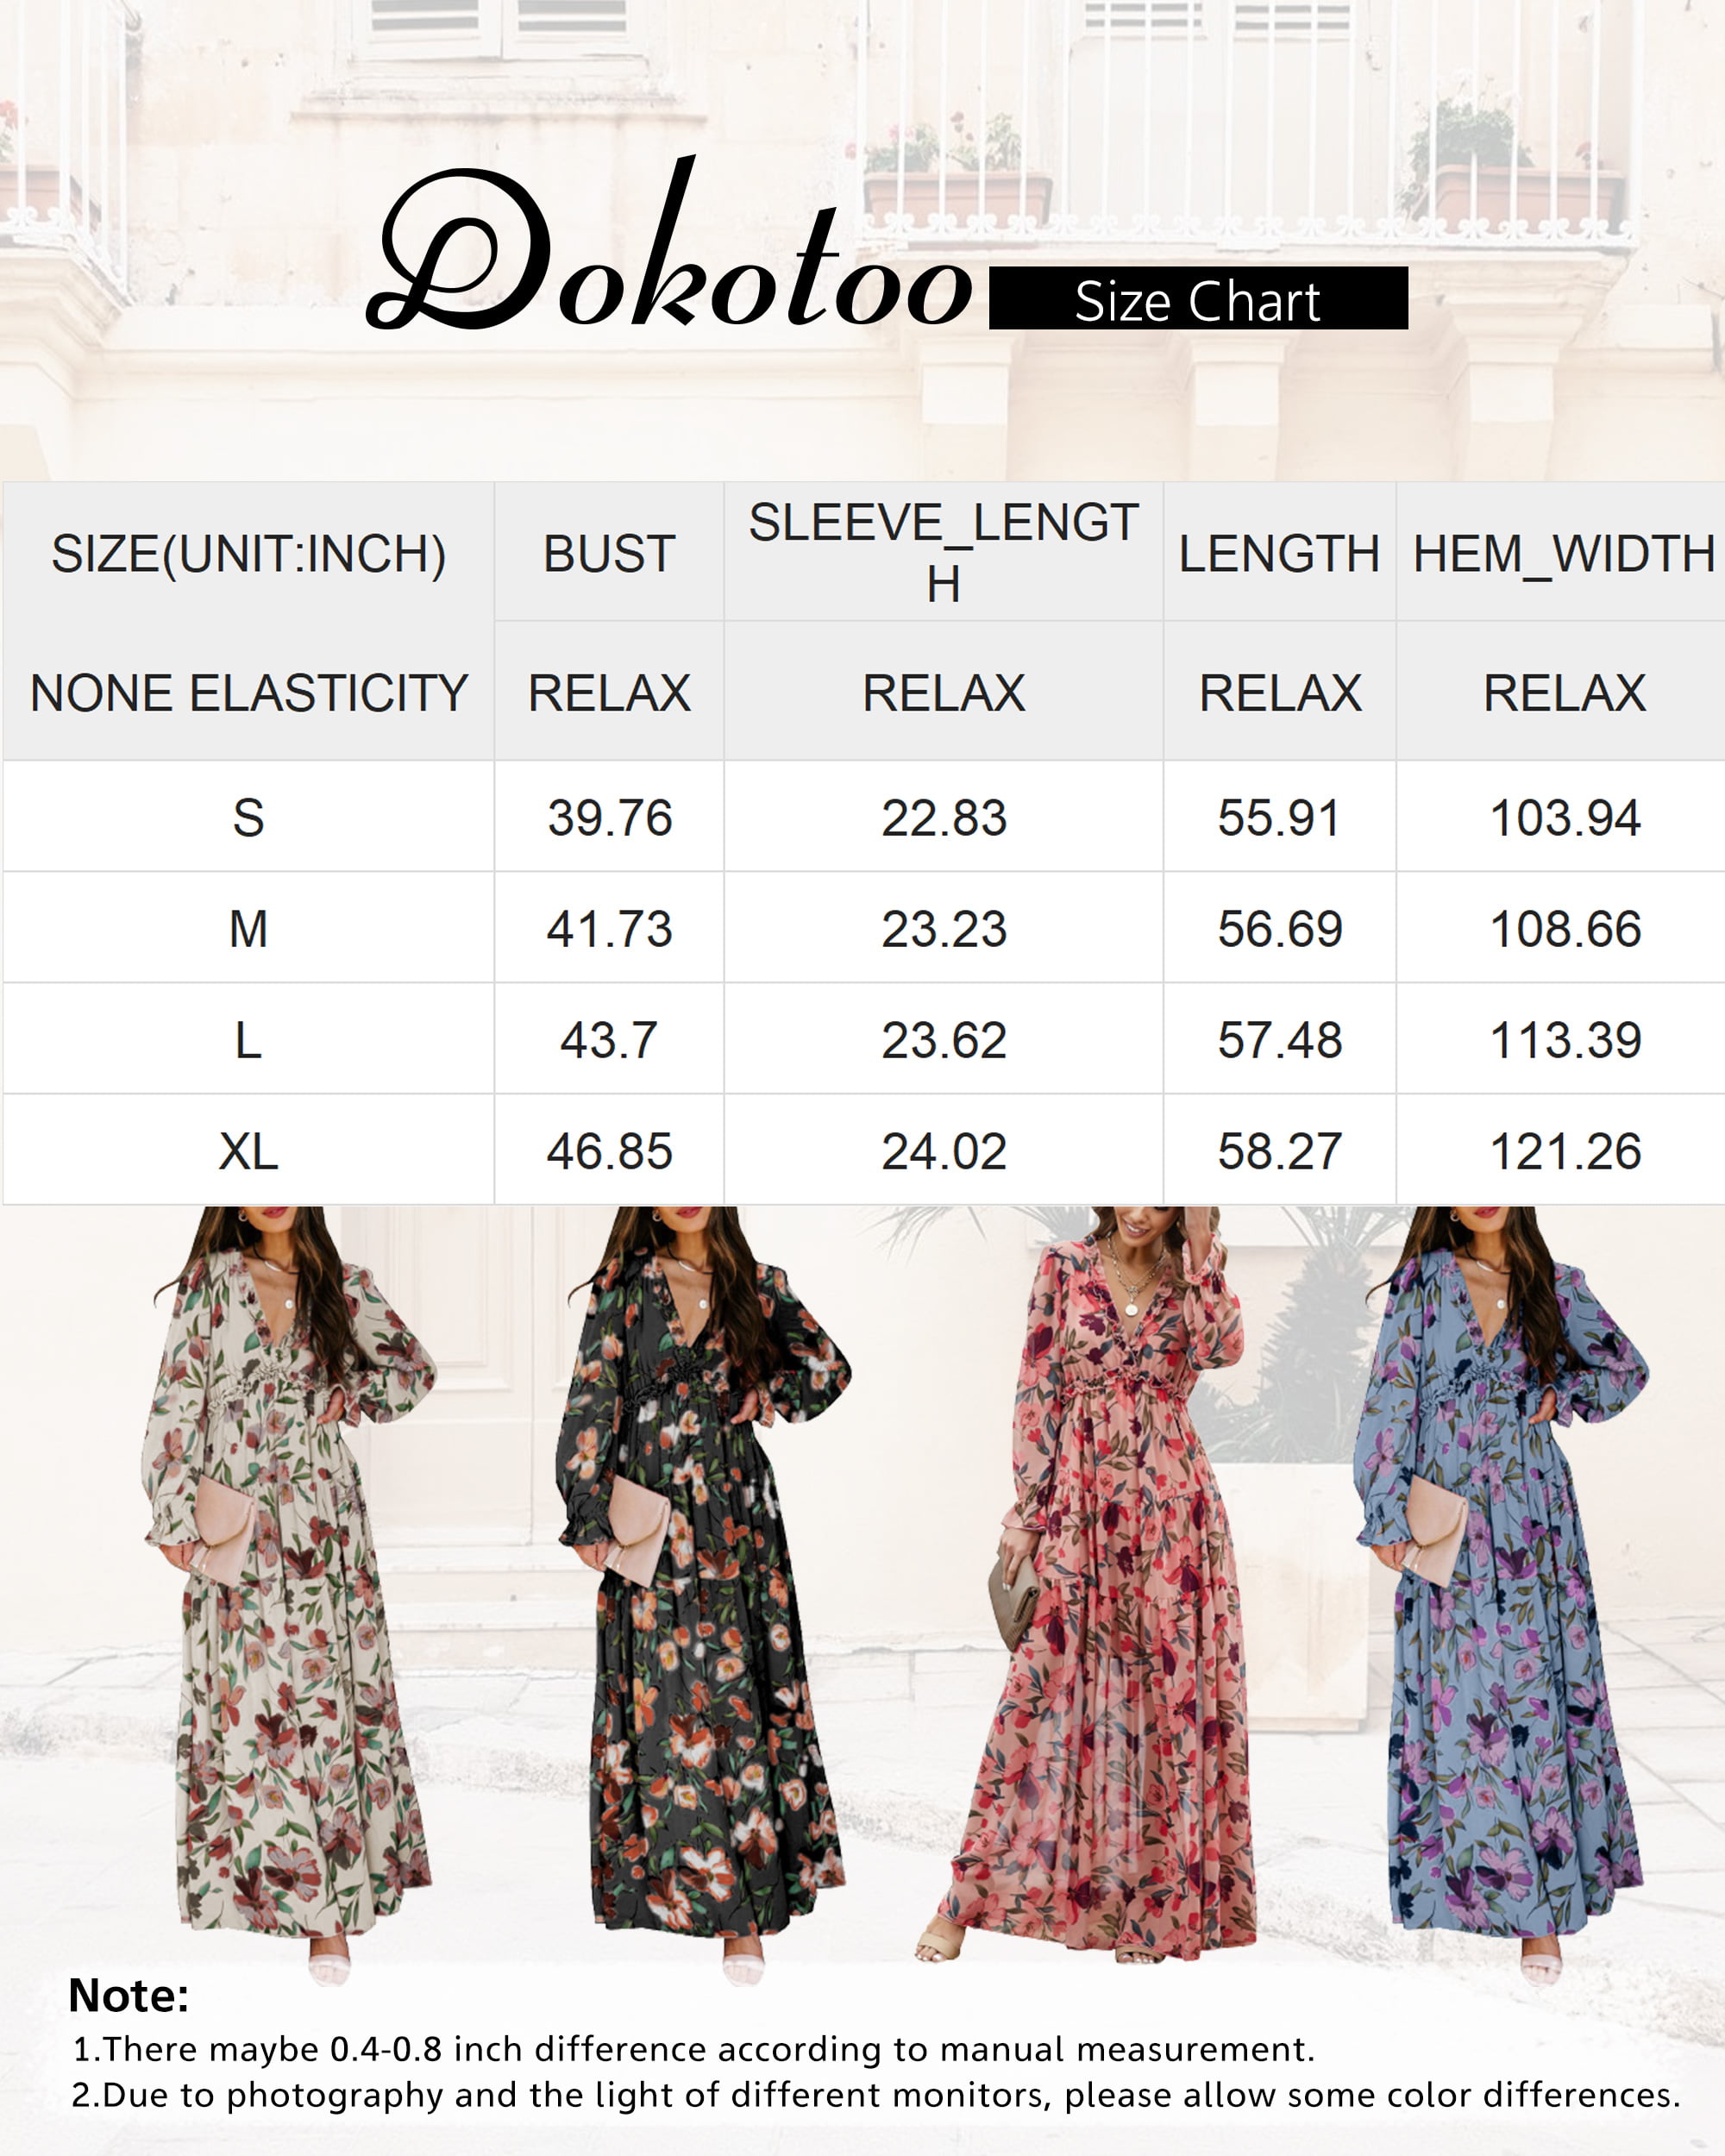 Dokotoo Women's Sky Blue Floral Maxi Dresses Casual Deep V Neck Long Sleeve Evening Dress Cocktail Party Dress for Women, US 16-18(XL) - image 3 of 8